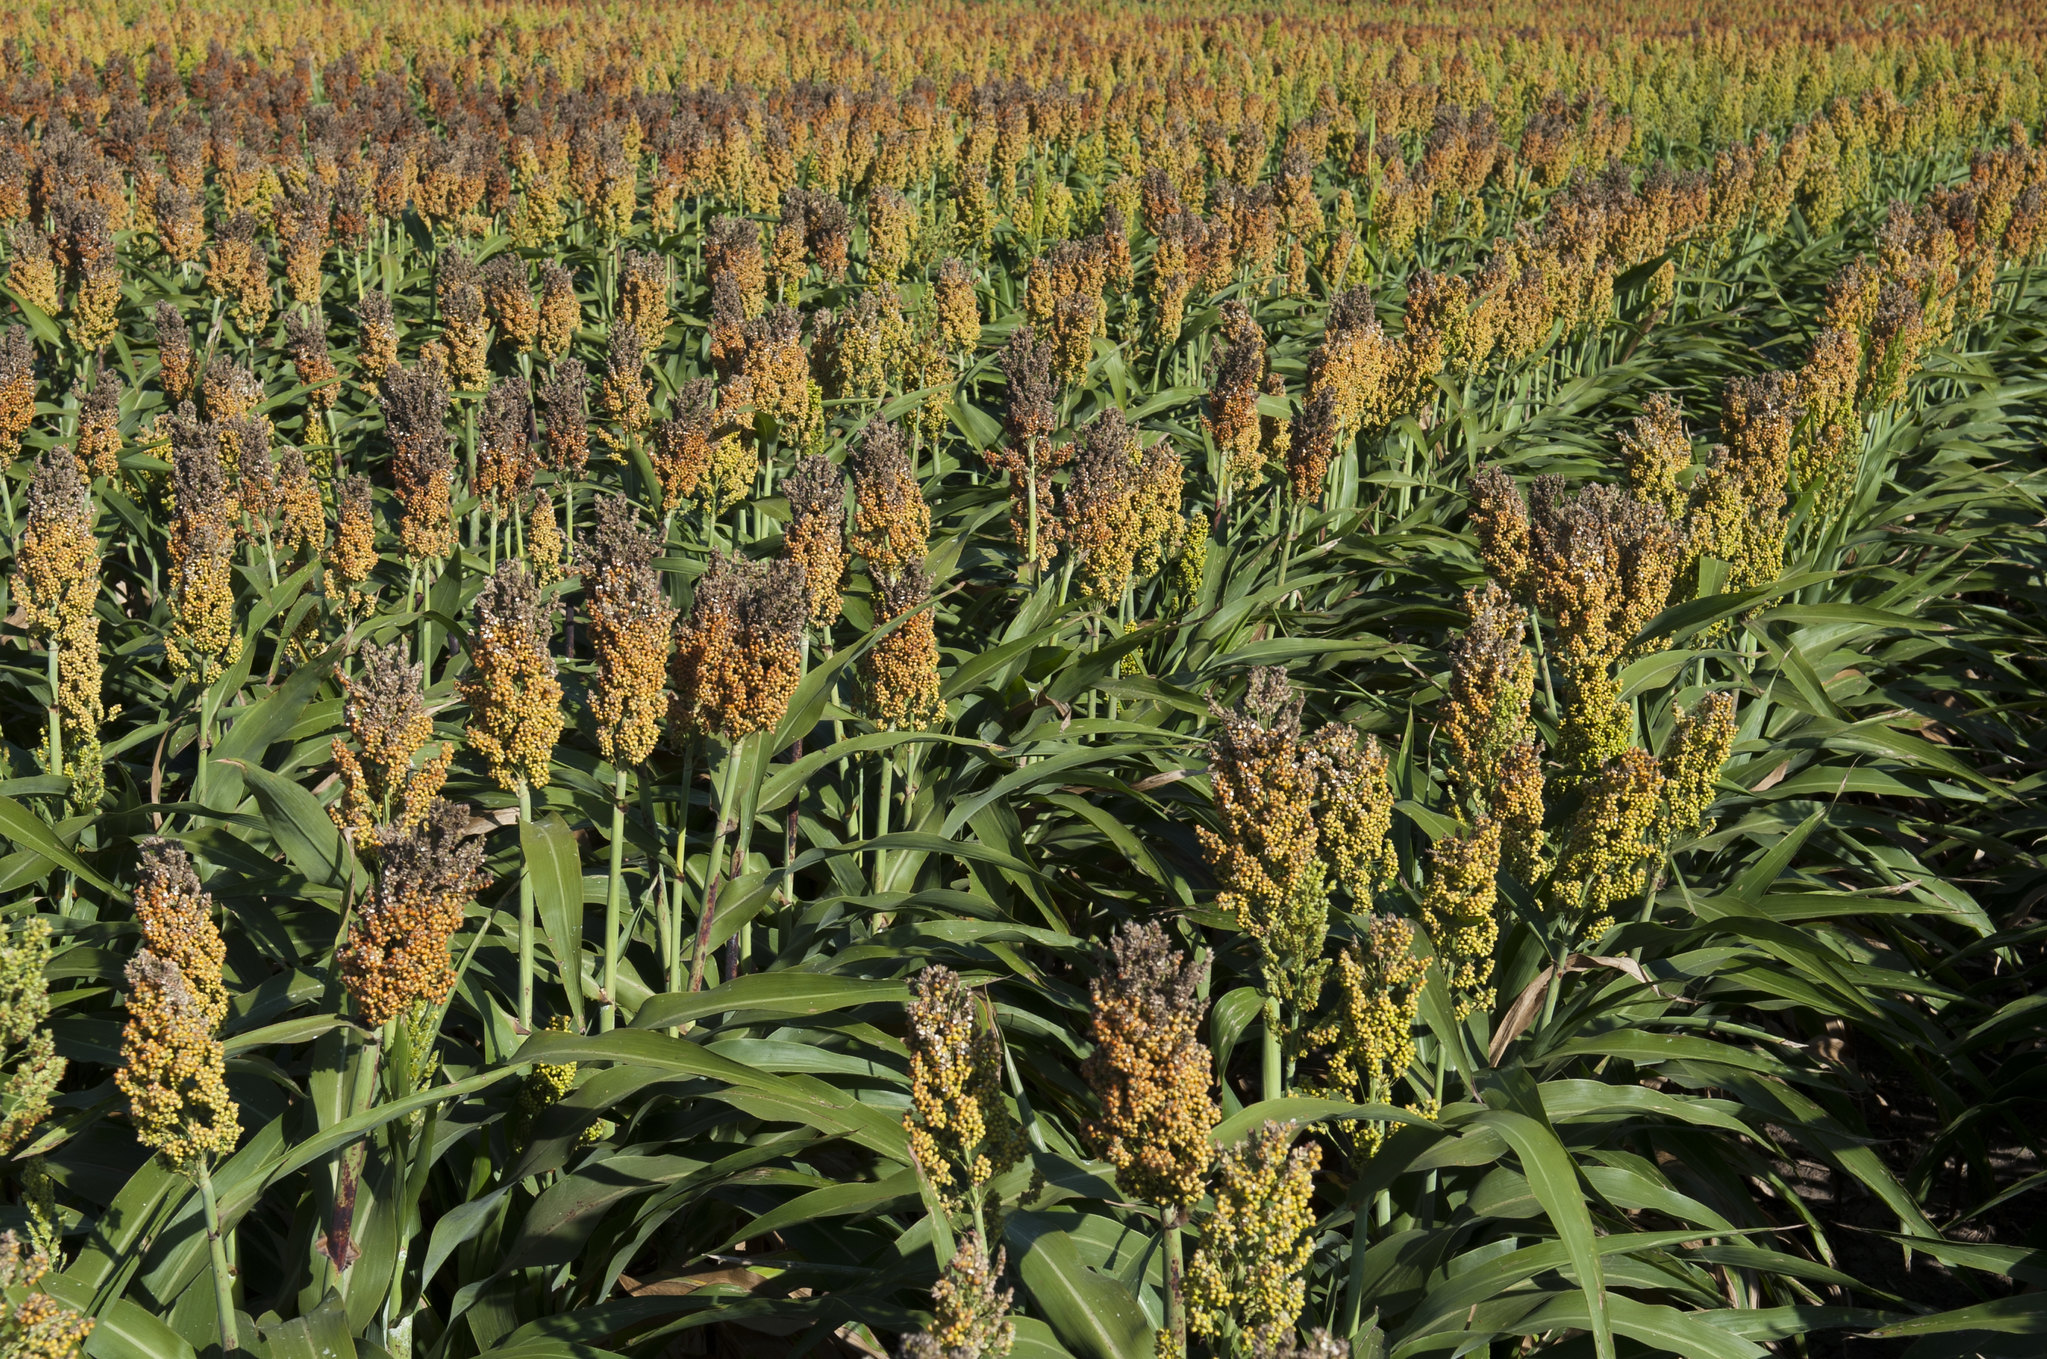 Peanut, sorghum (pictured) and pearl millet are part of the local cuisine in much of Africa and work together to create a resilient rotation for farmers, and nutritious diet for consumers. (Photo: Kansas State University Research and Extension news service.)